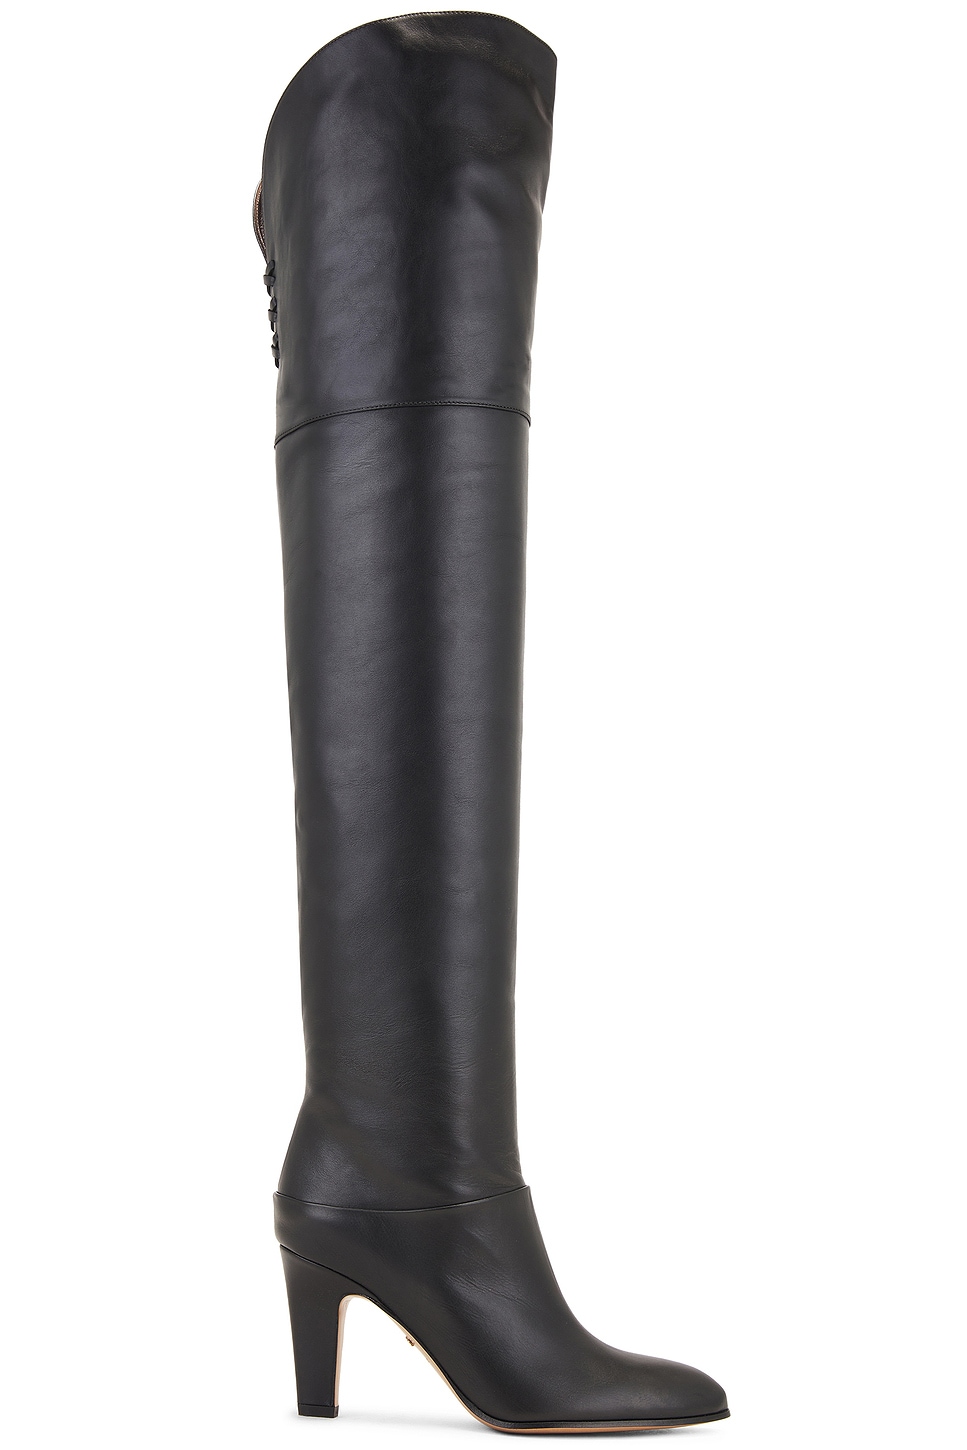 Image 1 of Chloe Eve Thigh High Boot in Black